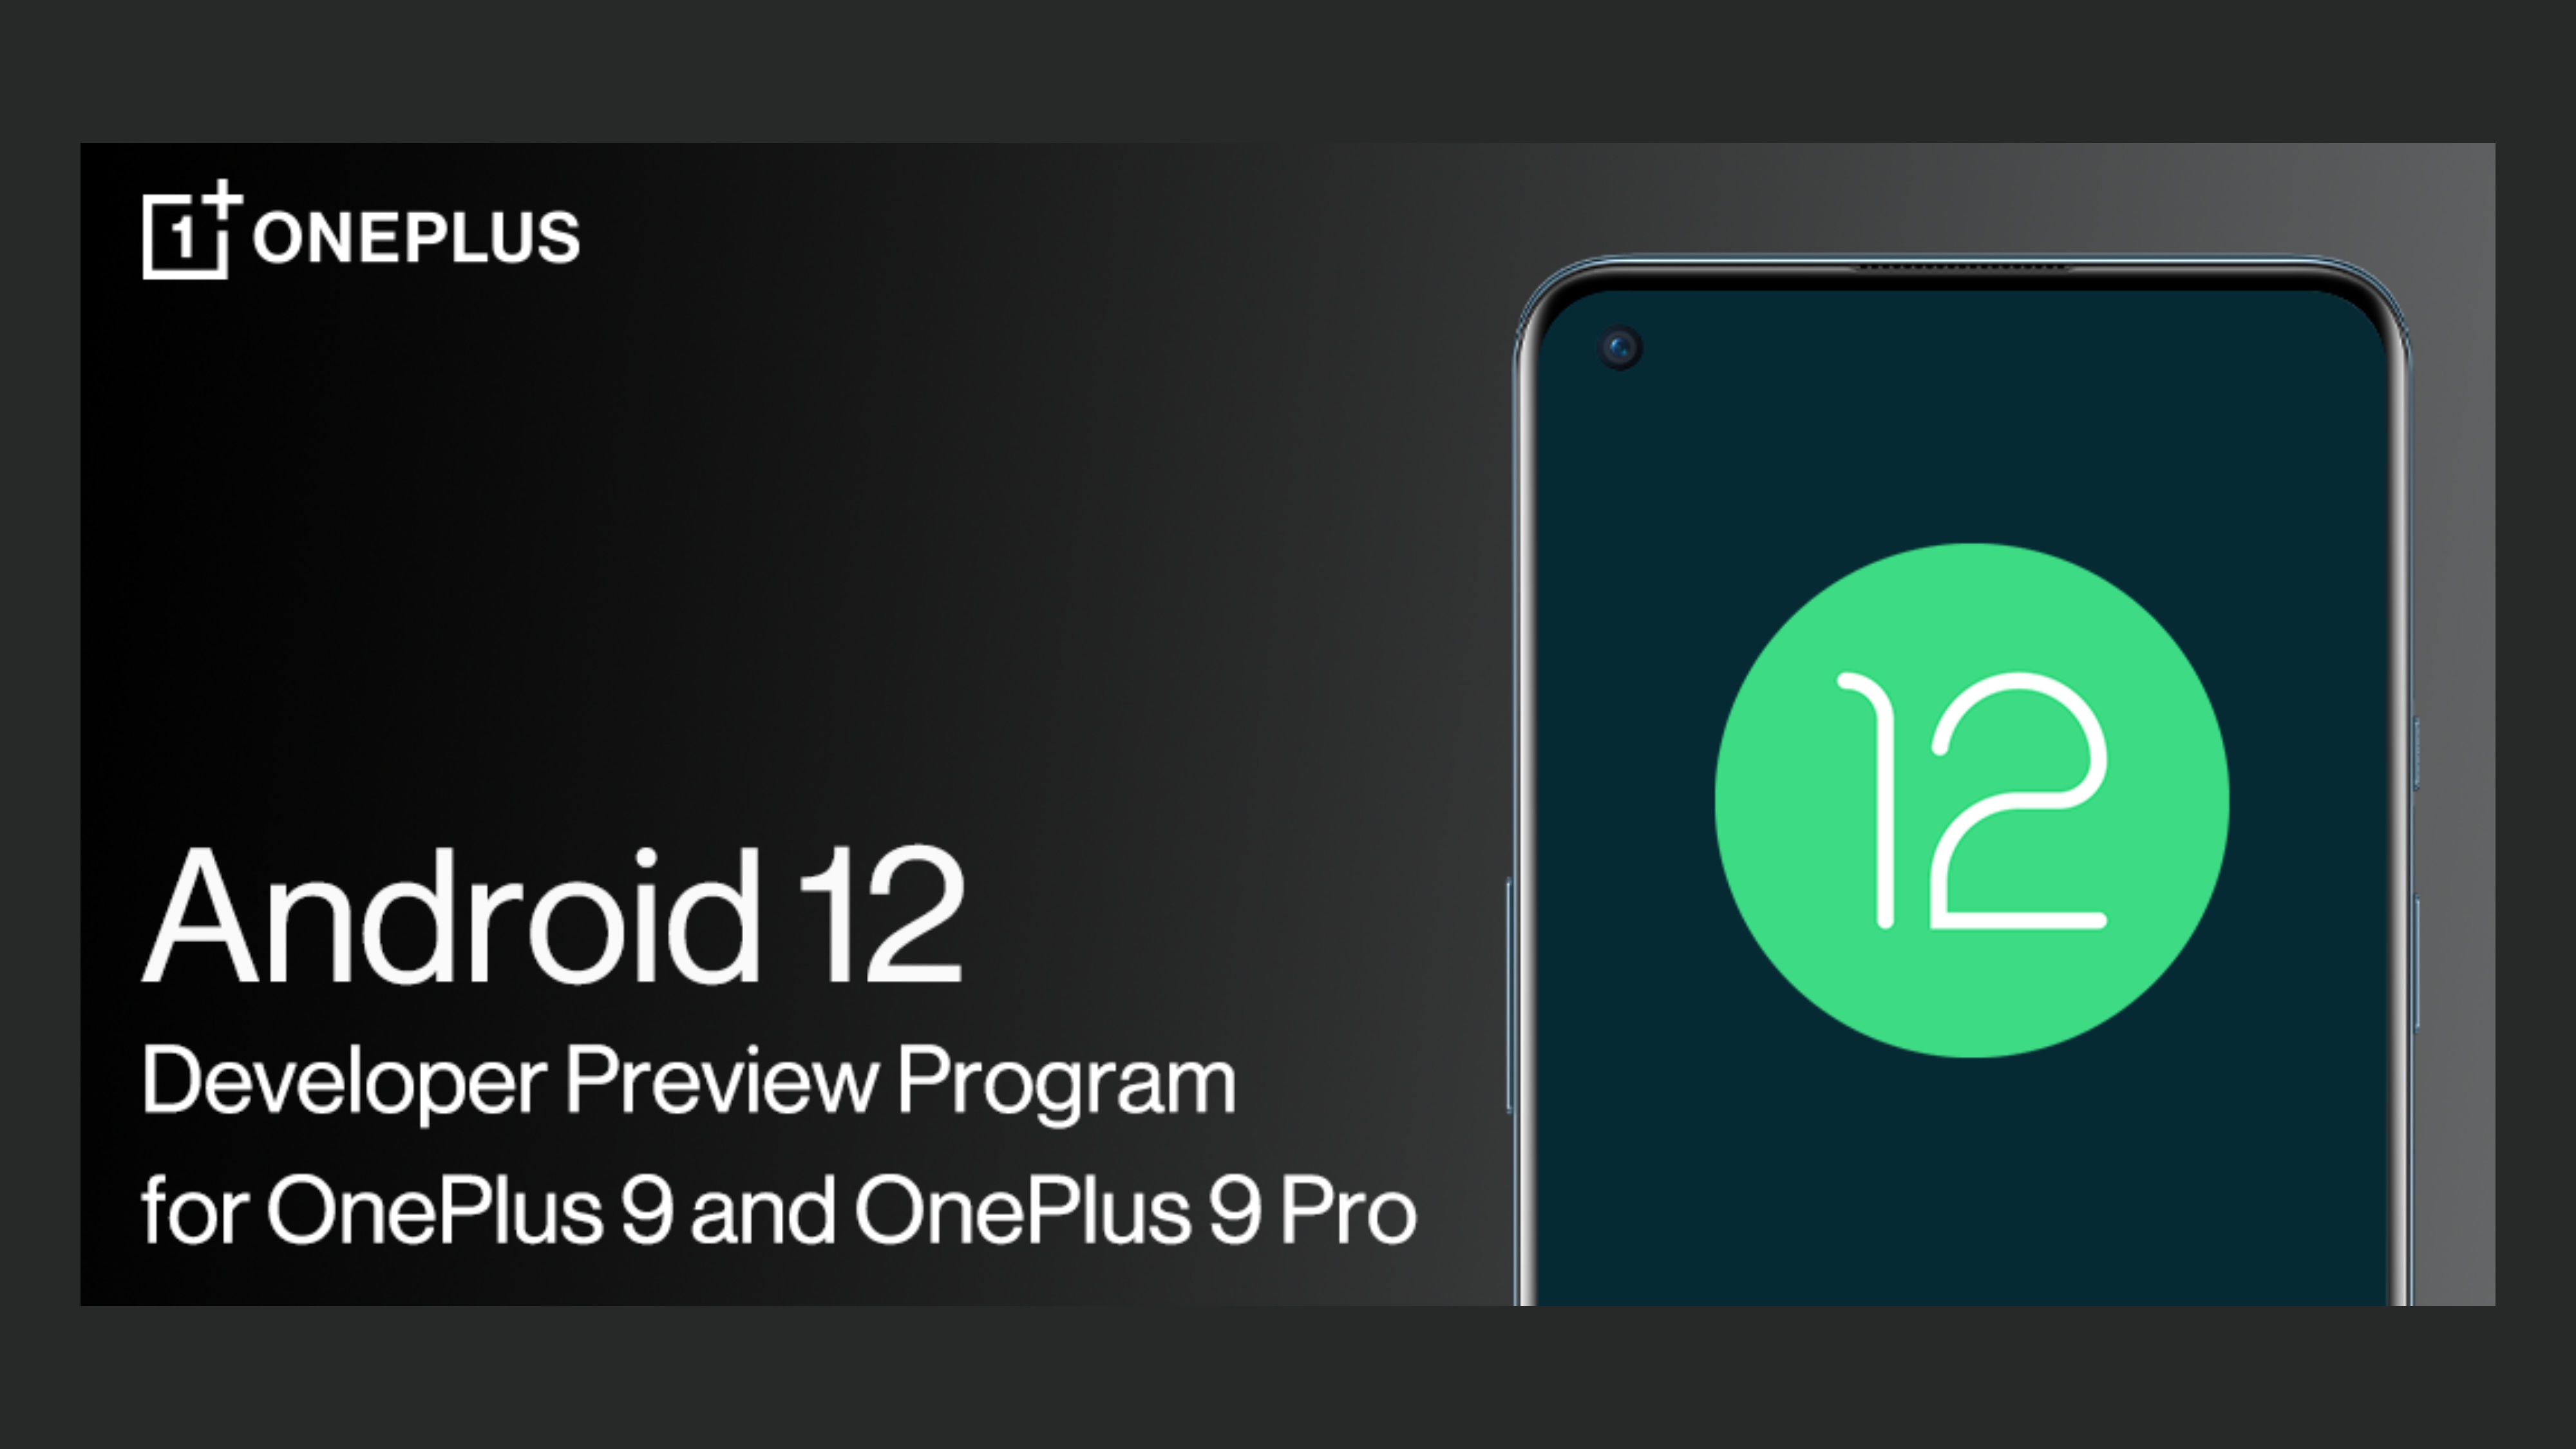 OnePlus 9 Pro Android 12 Developer Preview